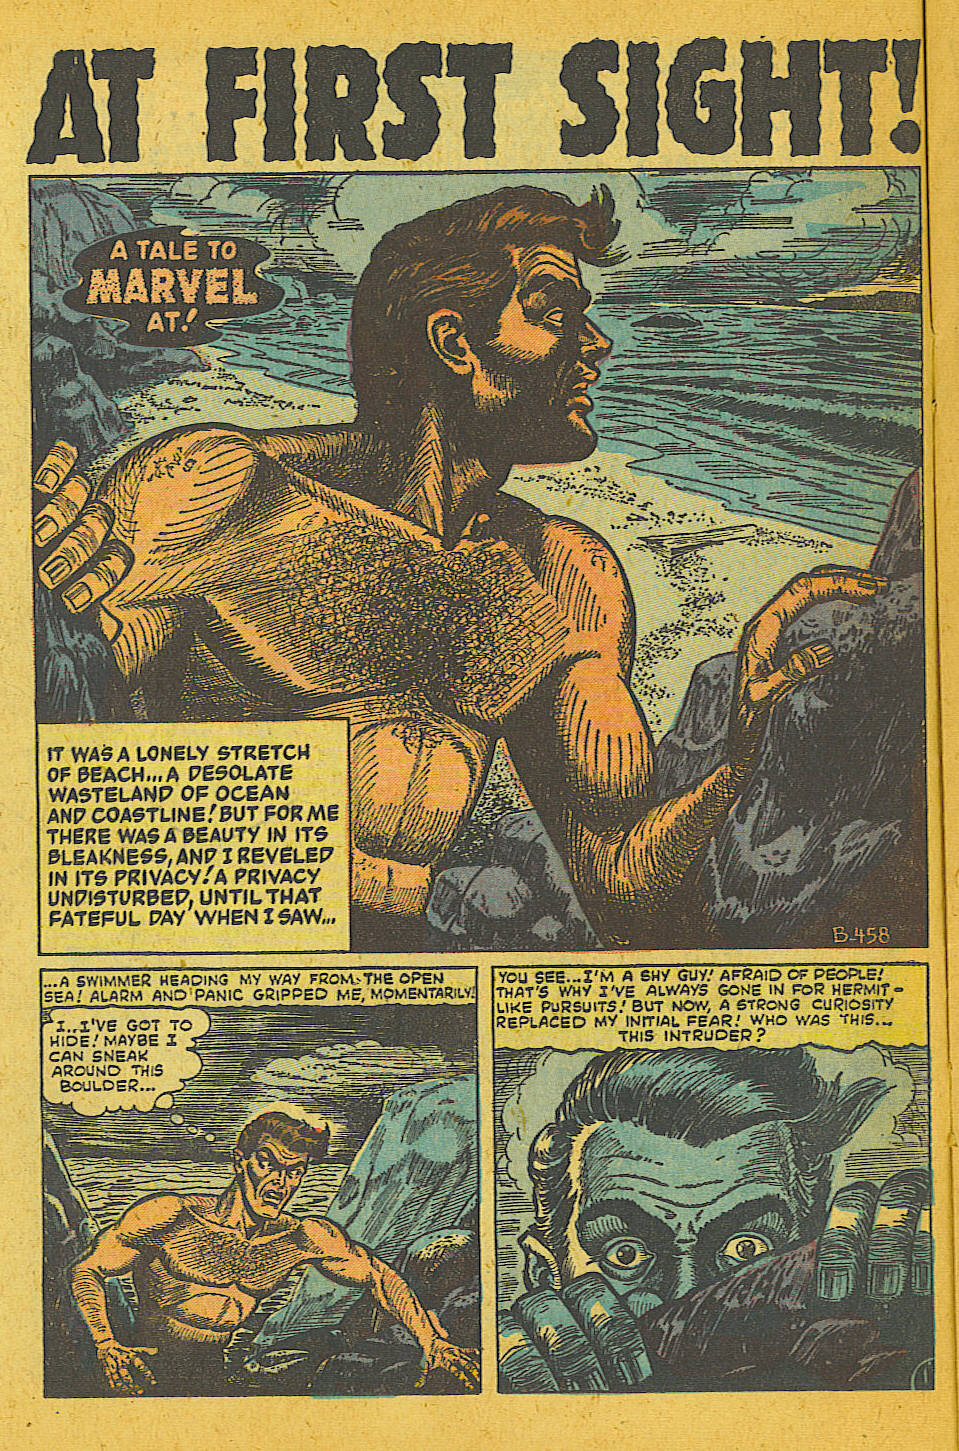 Marvel Tales (1949) 111 Page 12